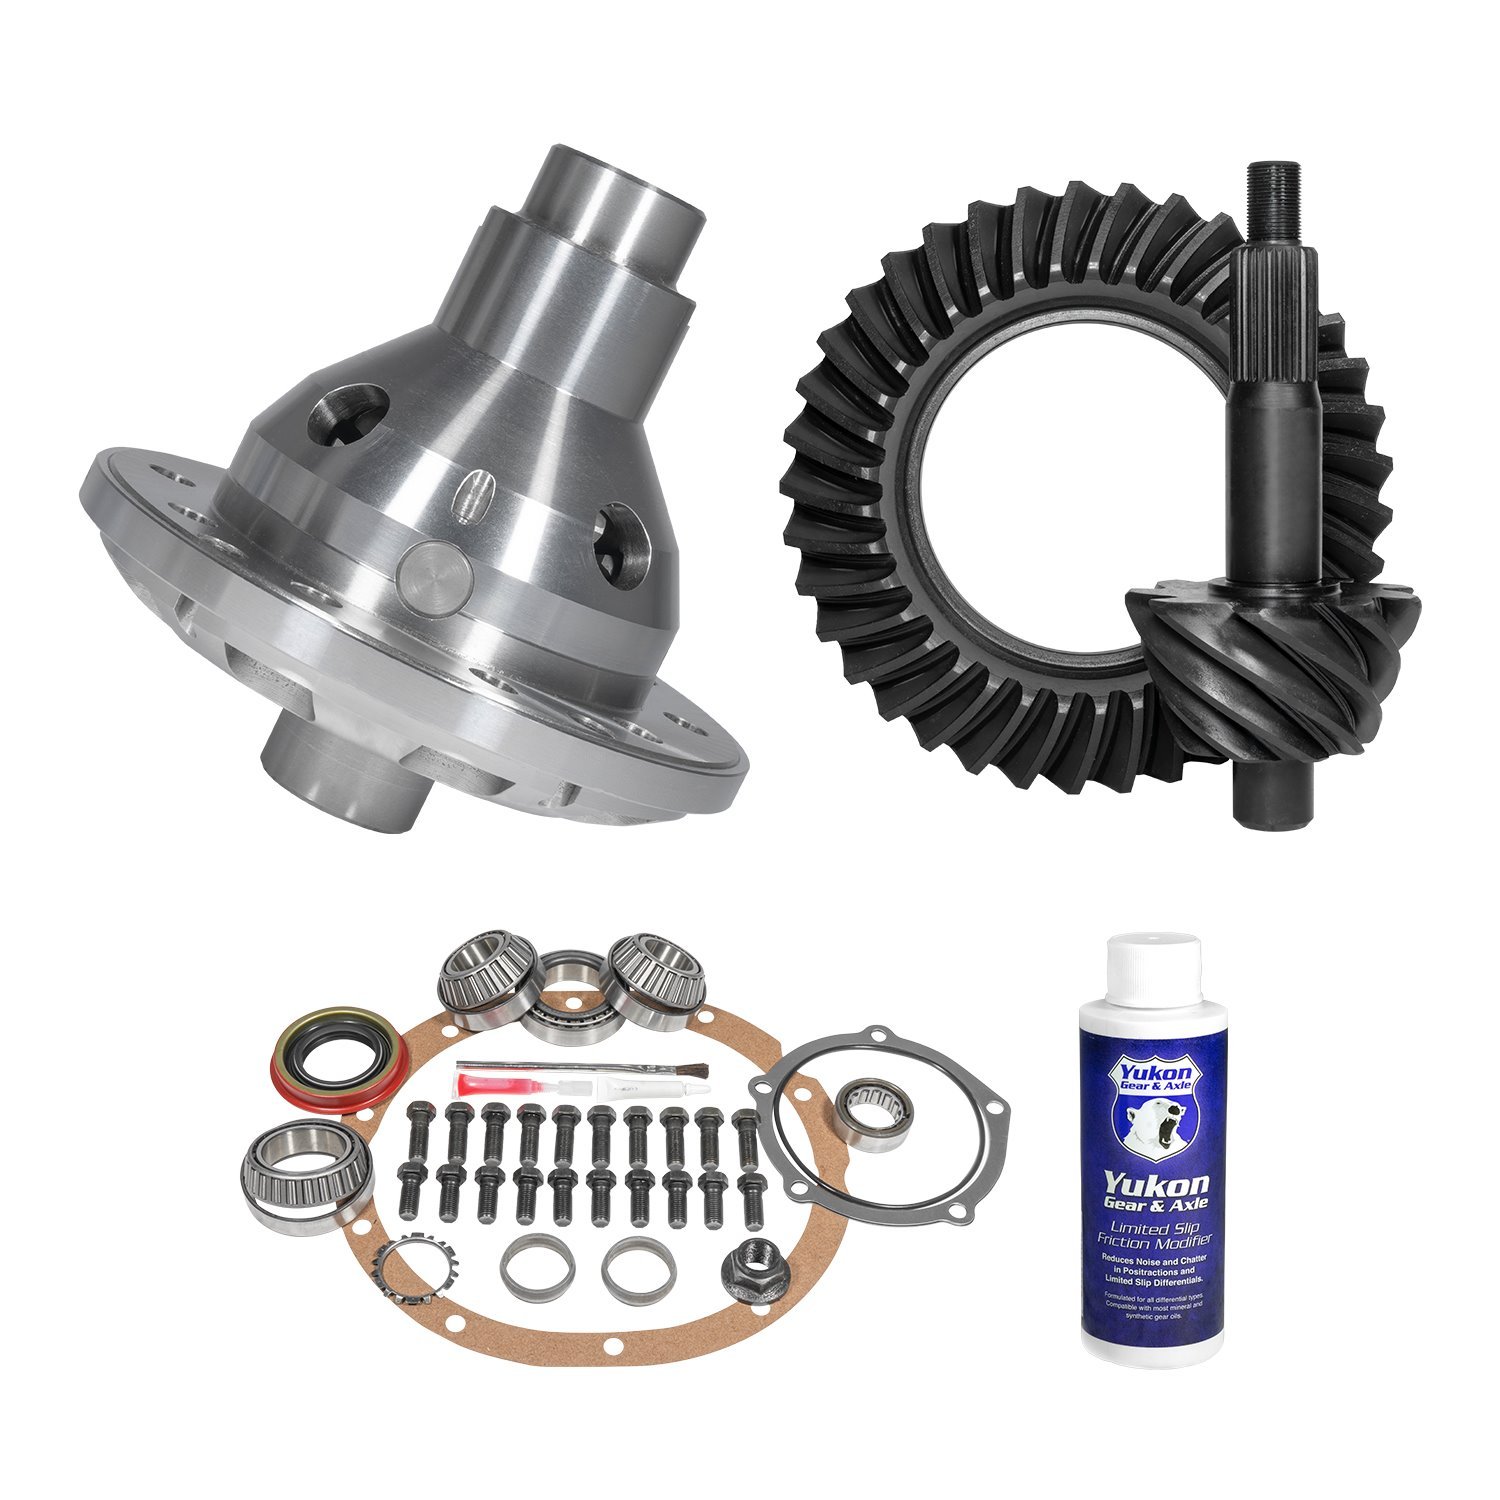 Muscle Car Limited Slip & Re-Gear Kit For Ford 9 in., 28 Spline, 4.11 Ratio